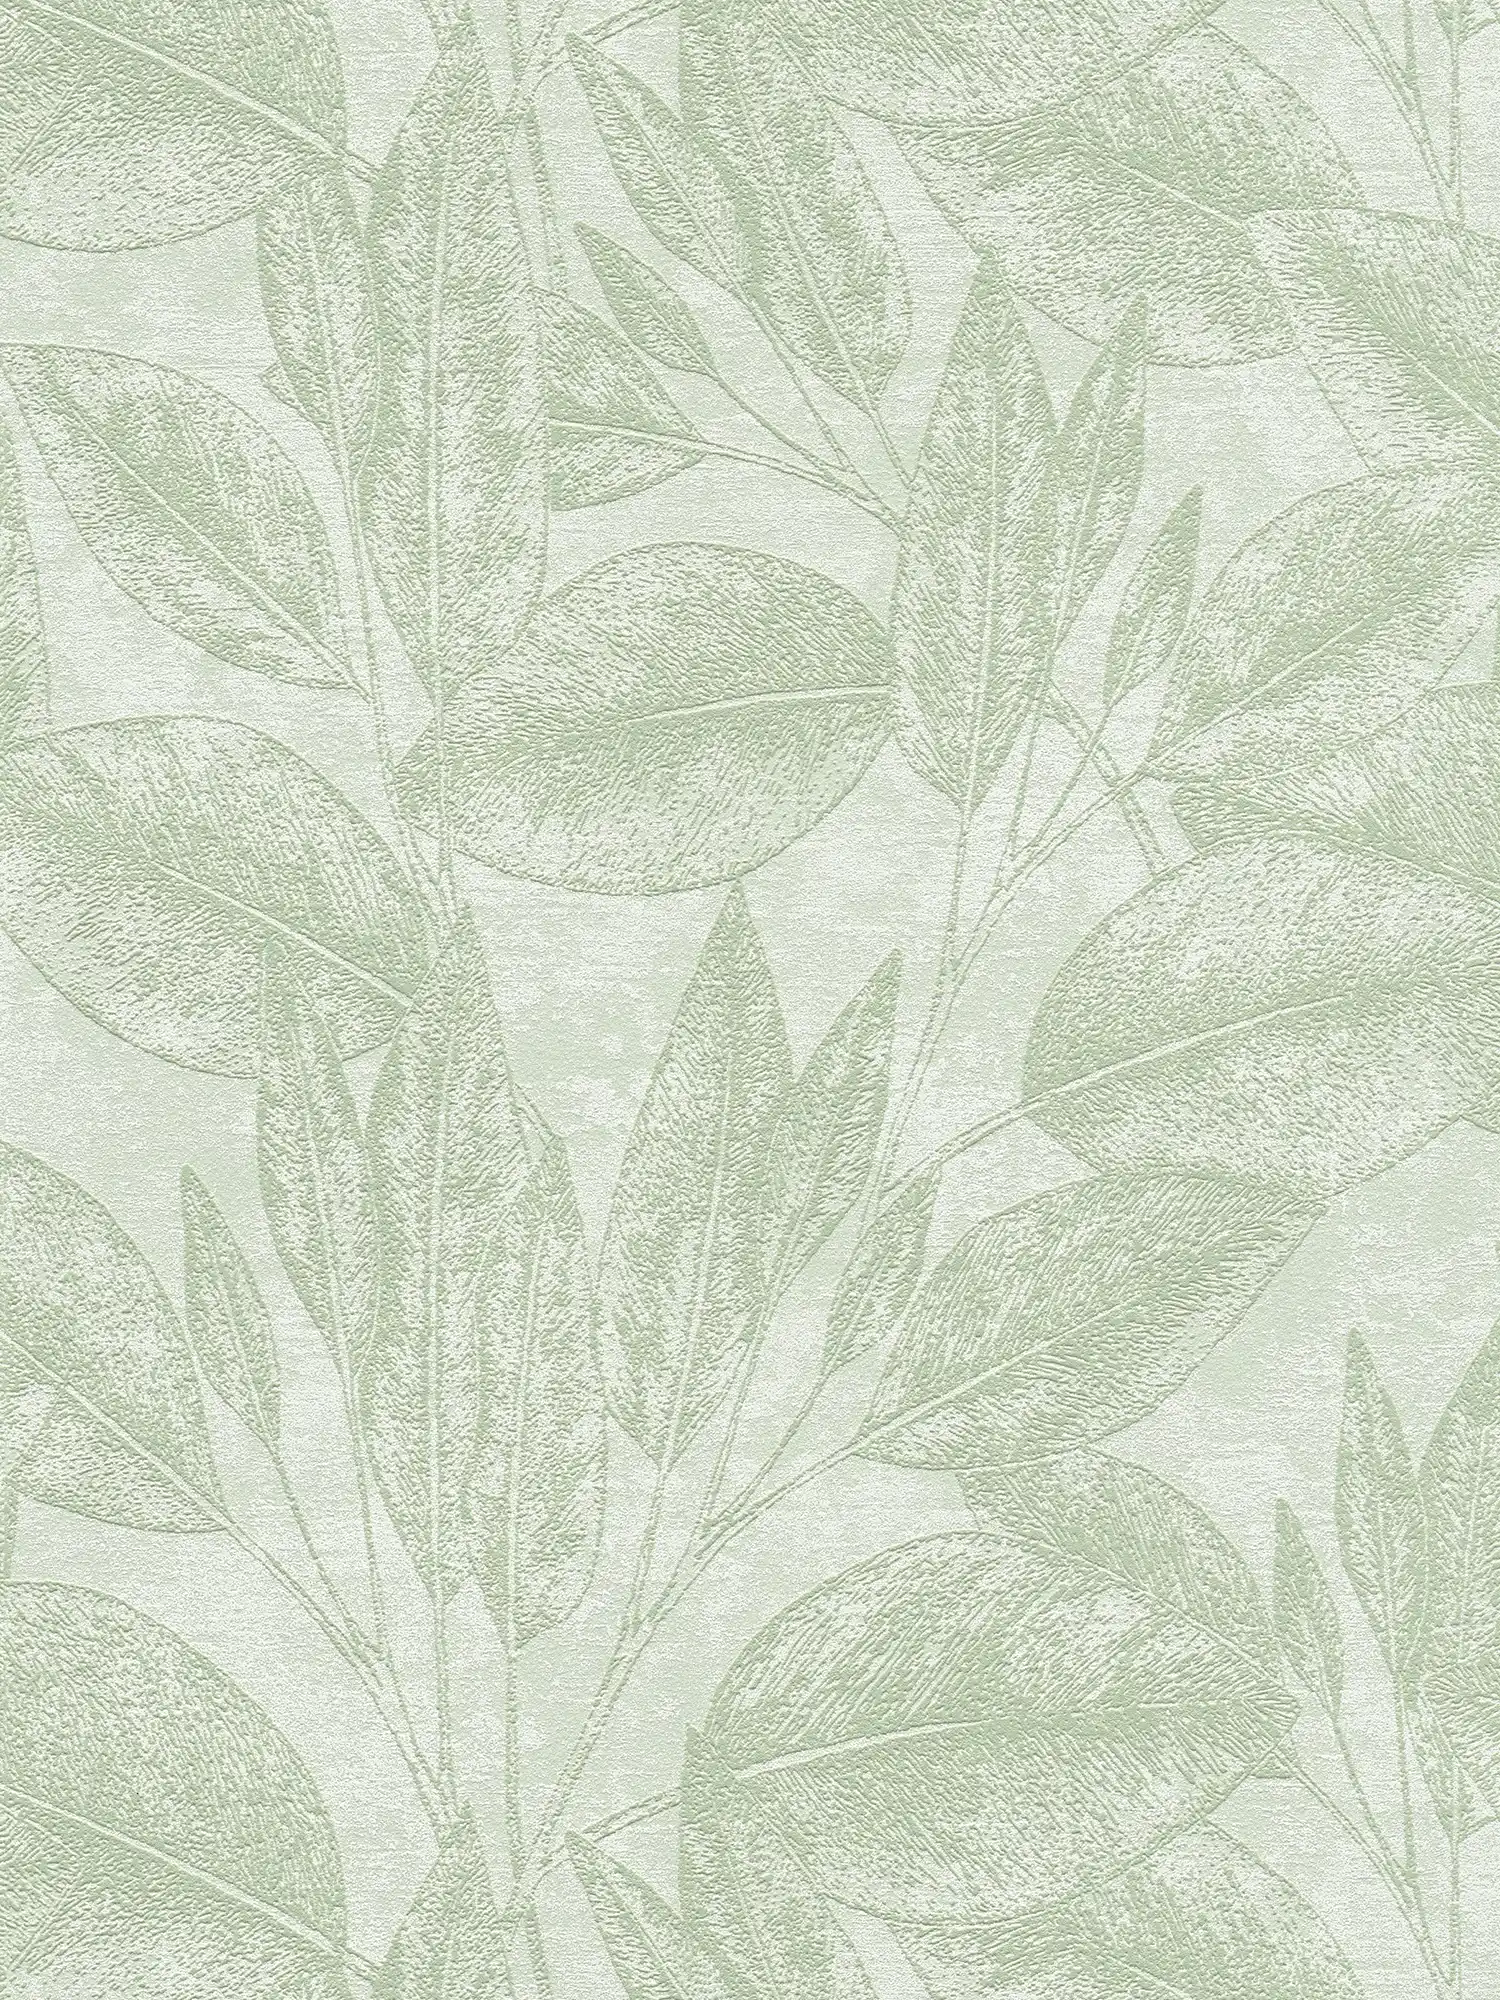 Nature non-woven wallpaper with leaves & texture pattern - green
